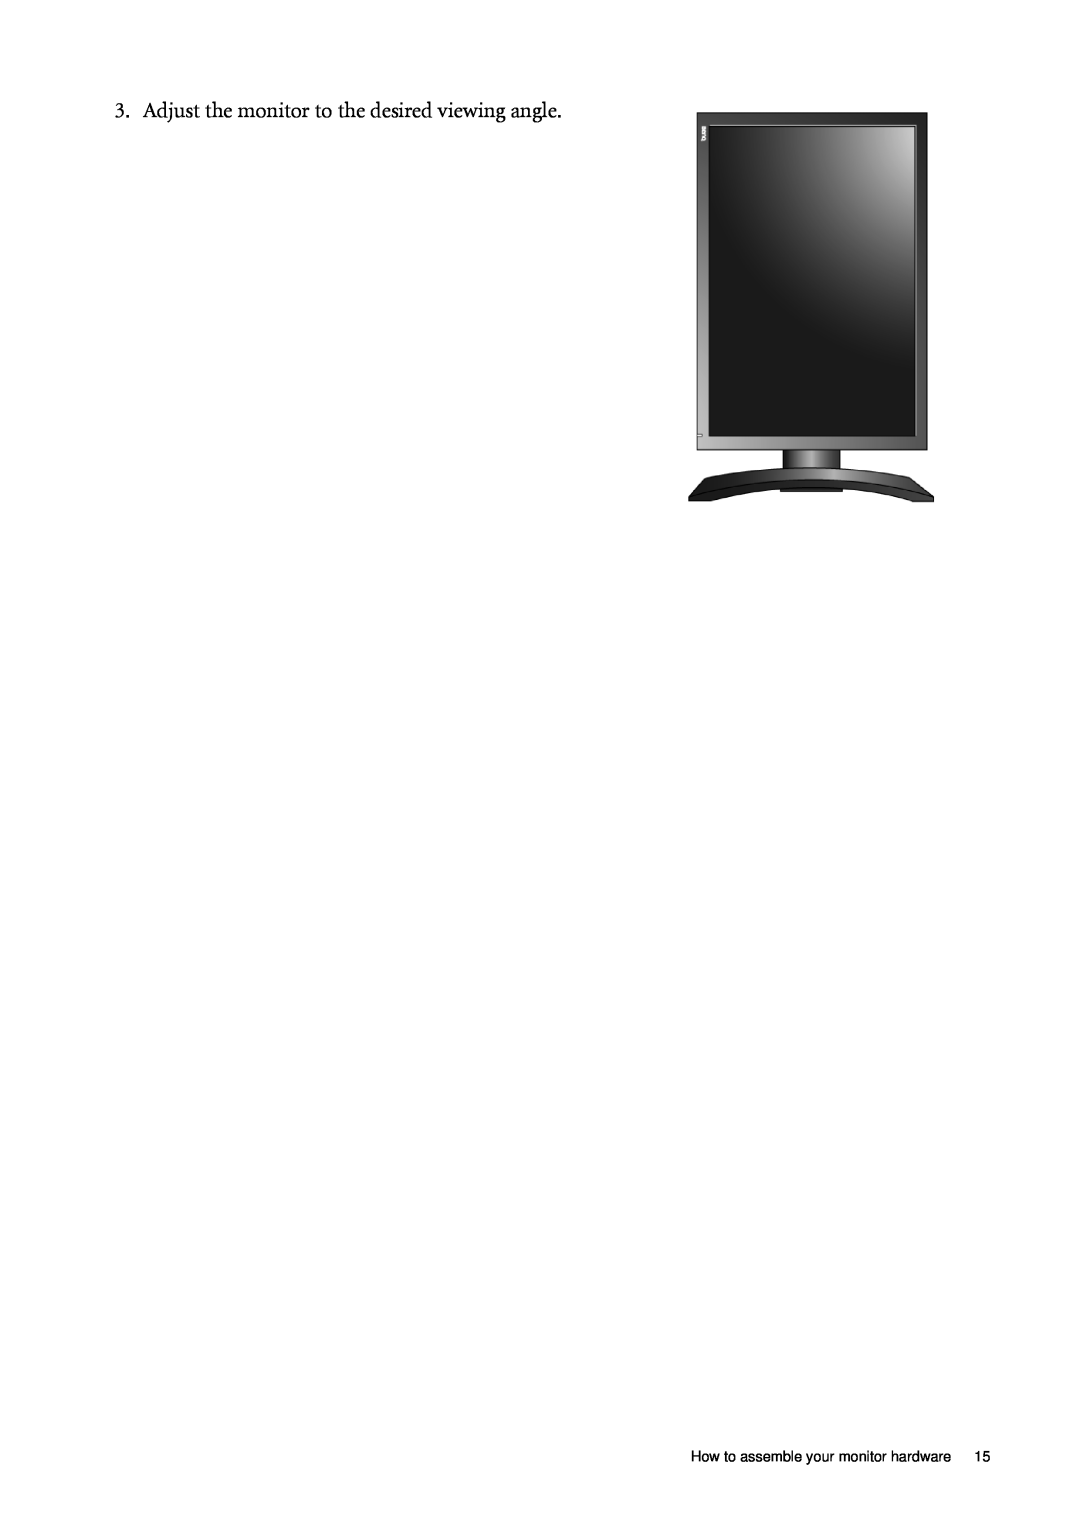 BenQ FP241WZ user manual Adjust the monitor to the desired viewing angle, How to assemble your monitor hardware 